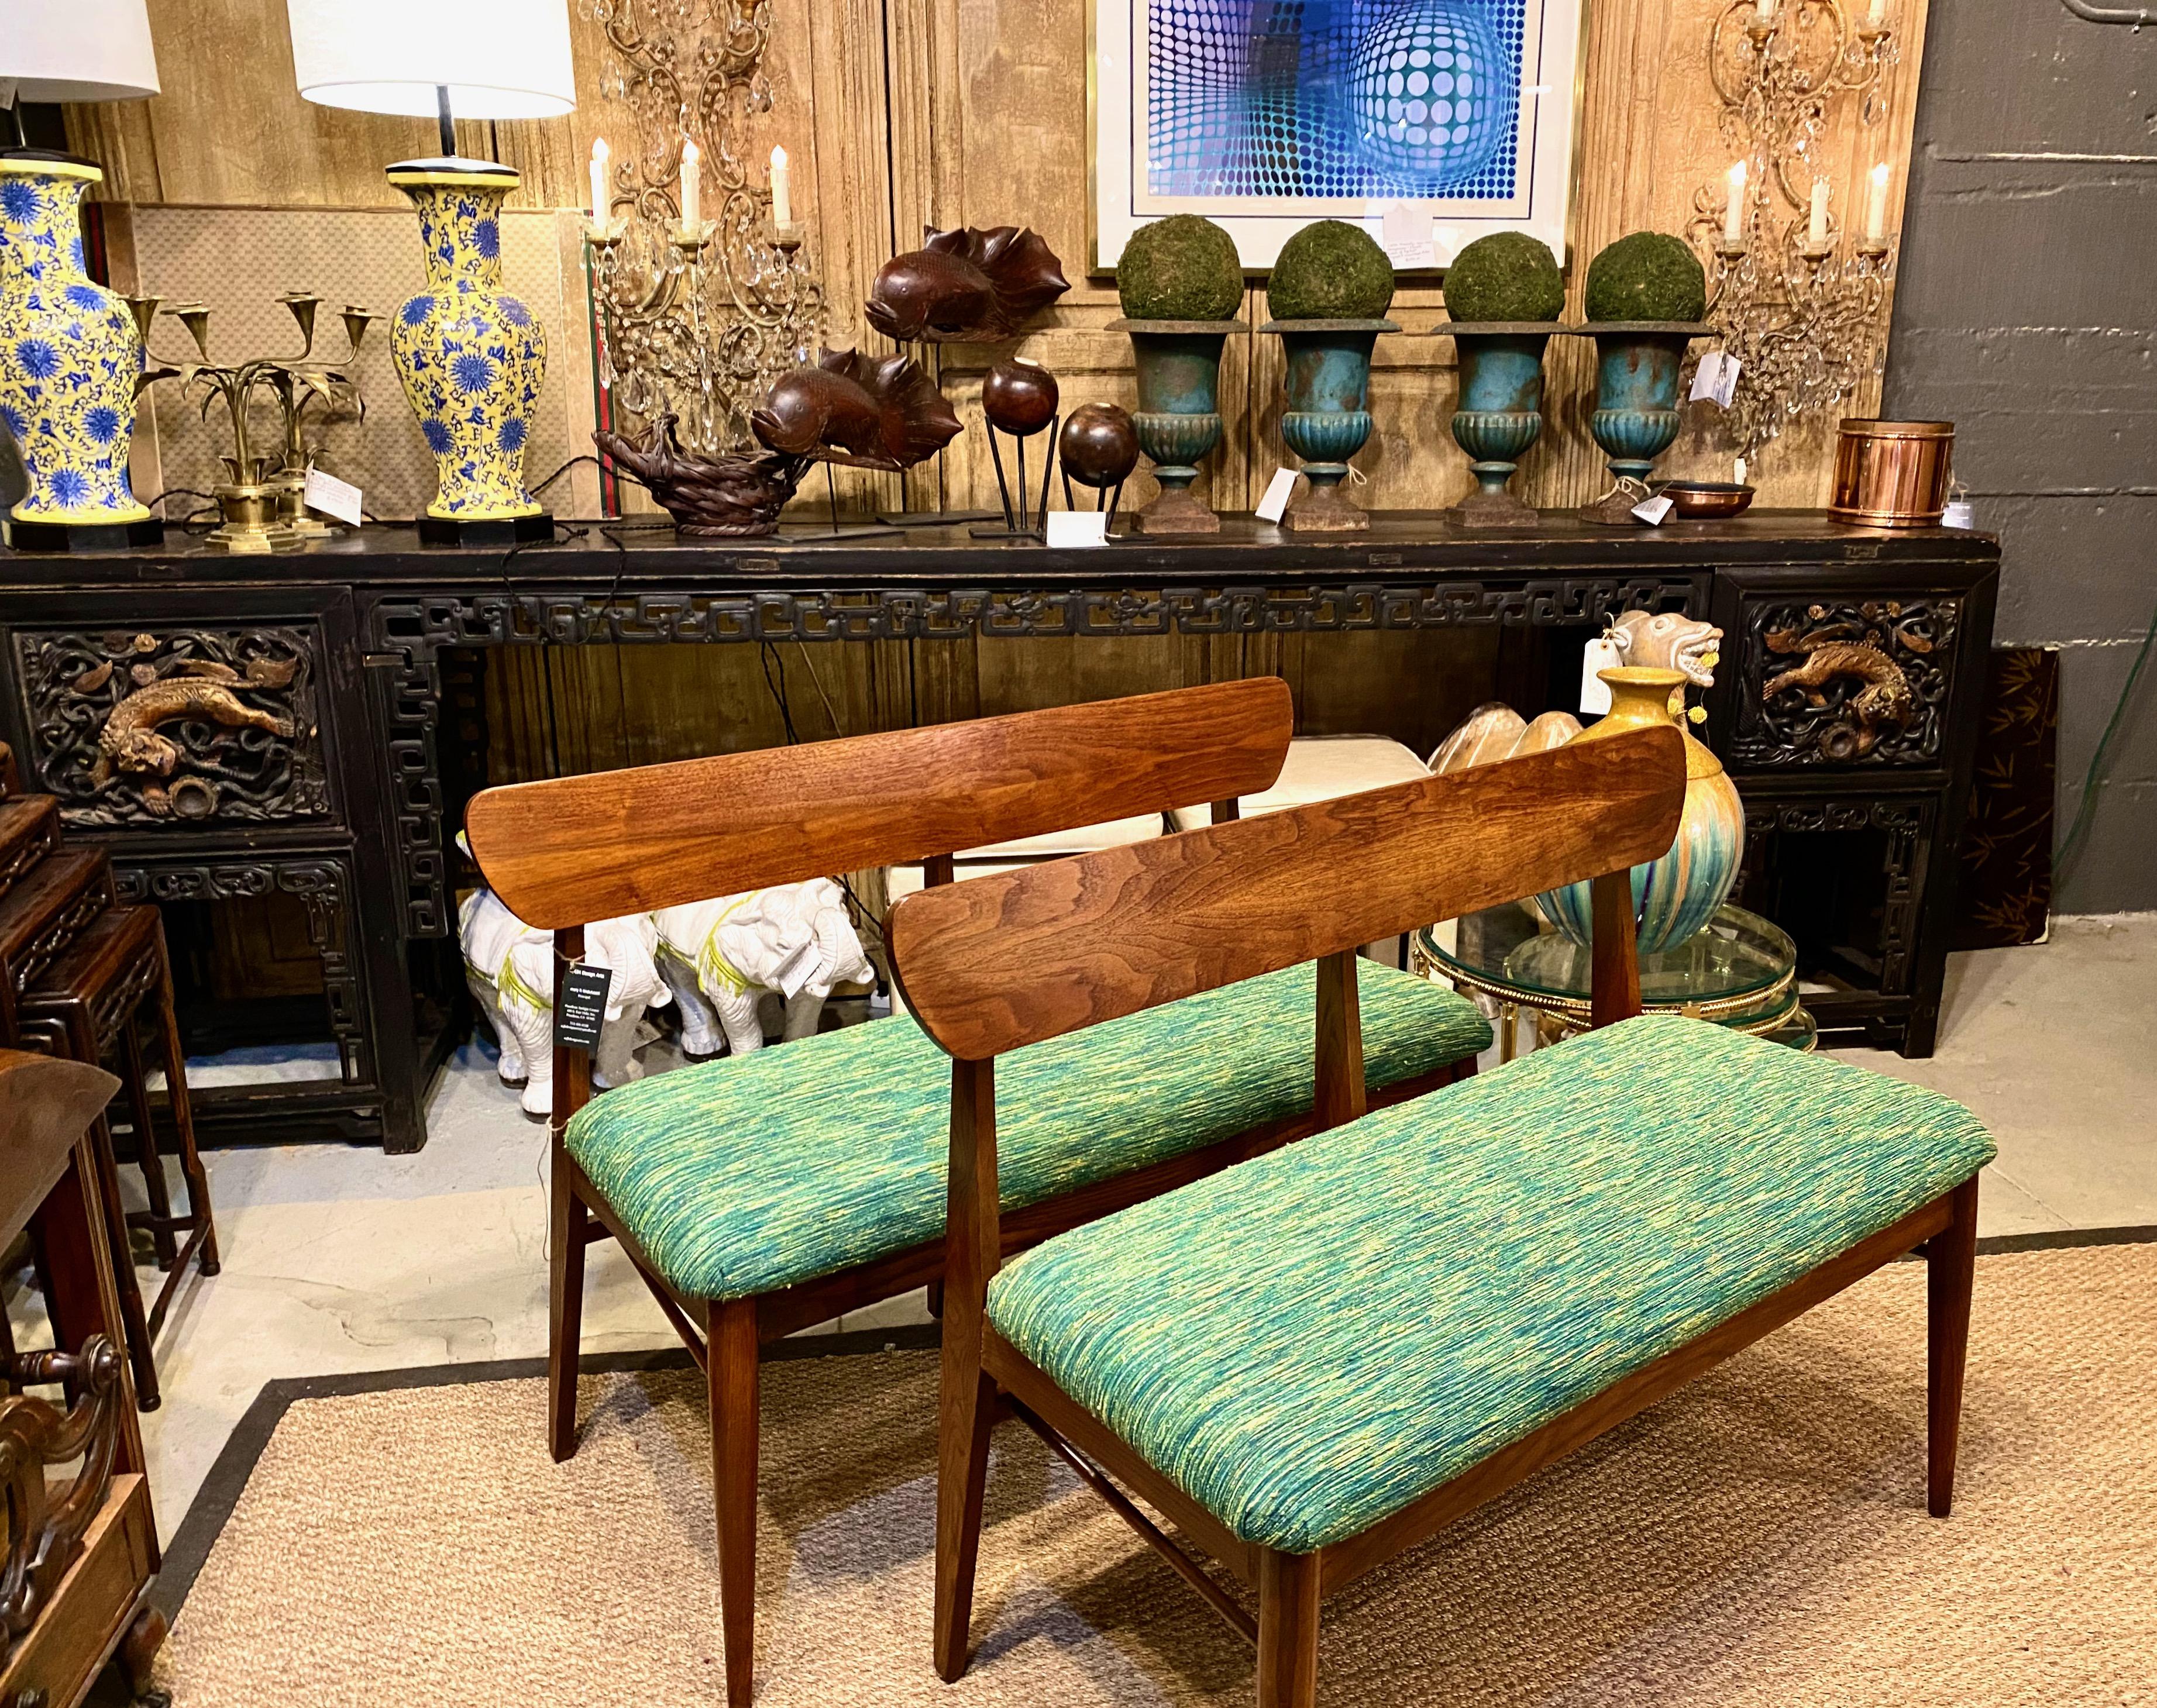 This is a great pair of mid-century back bench in a Scandinavian Modern design. The benches retain their original wood surface and have been newly upholstered in a Knoll fabric that coordinates well with the modern frames. Pairs of modern benches